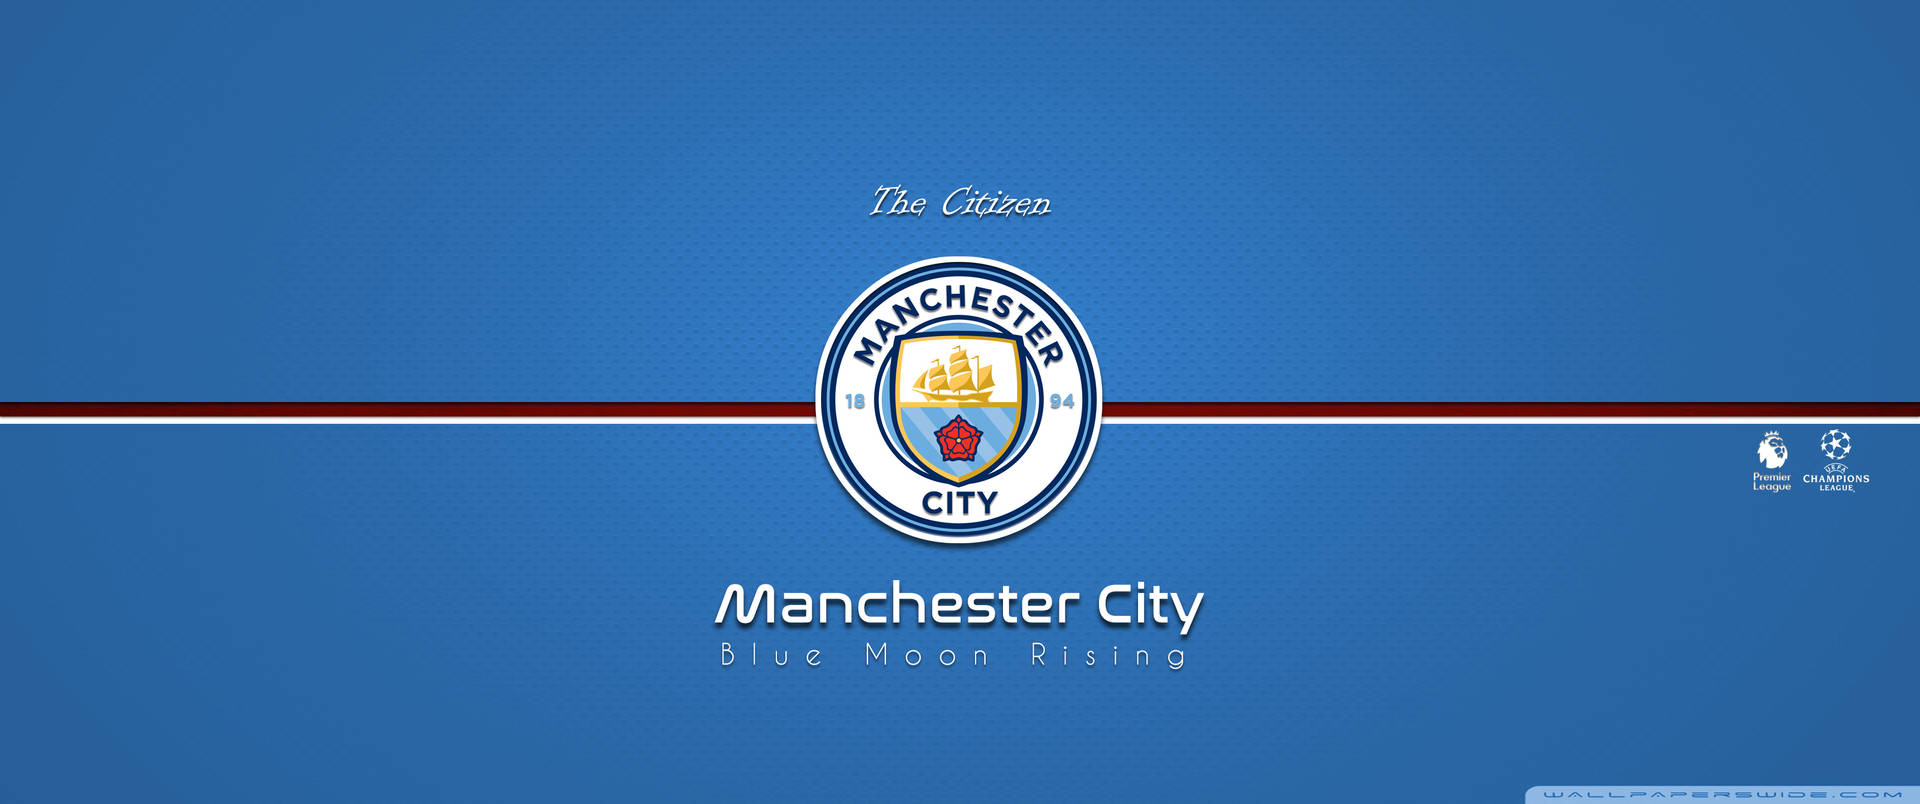 Manchester City 4k Blue Moon Rising Background